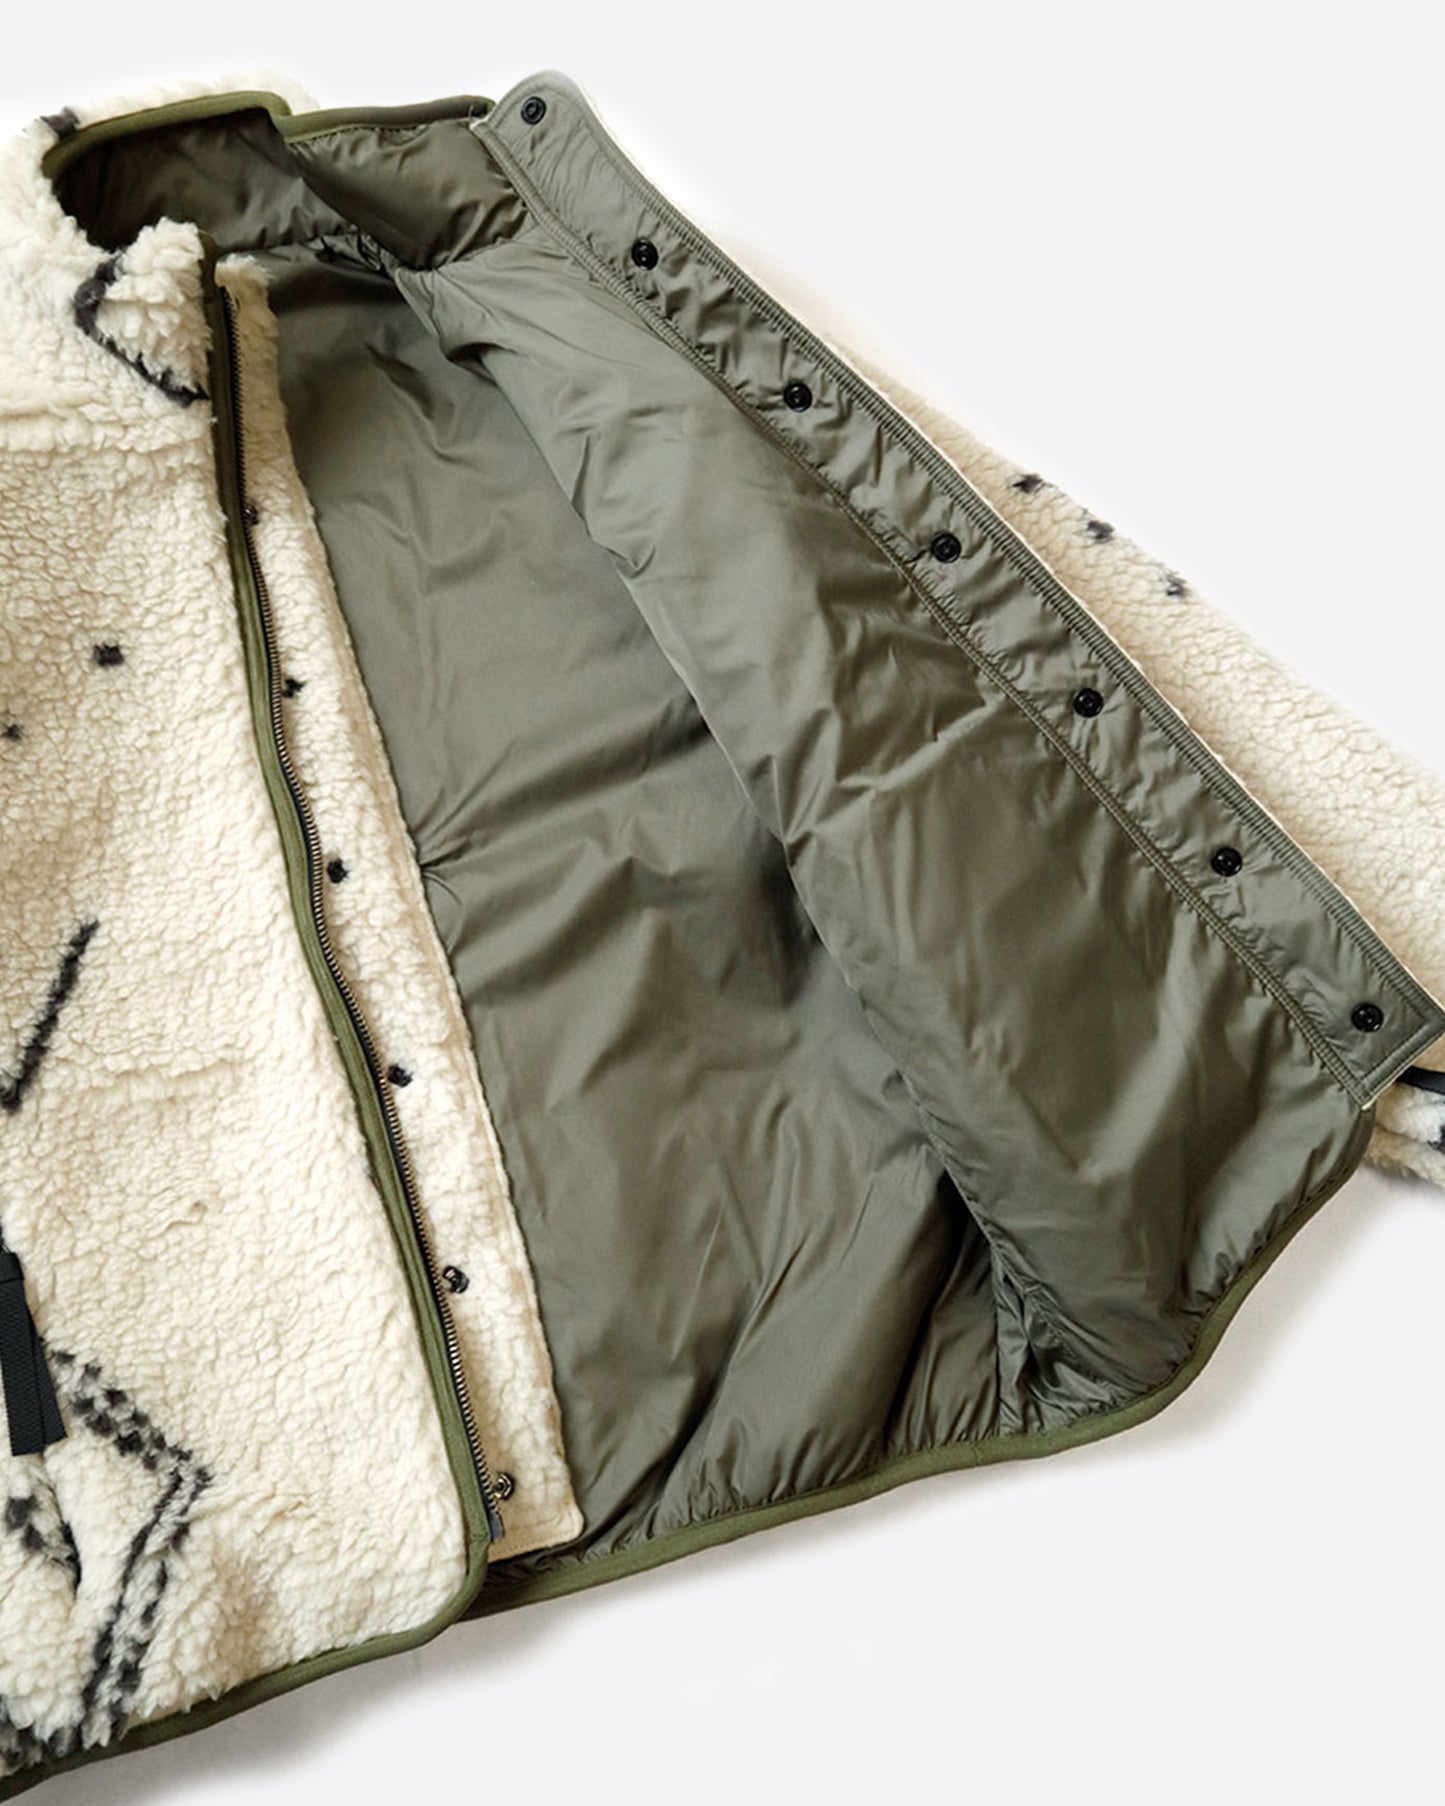 A reverisble jacket with white Beni Ourain patterned fleece on one side and a green nylon shell on the other, shown unzipped so you can see the interior.